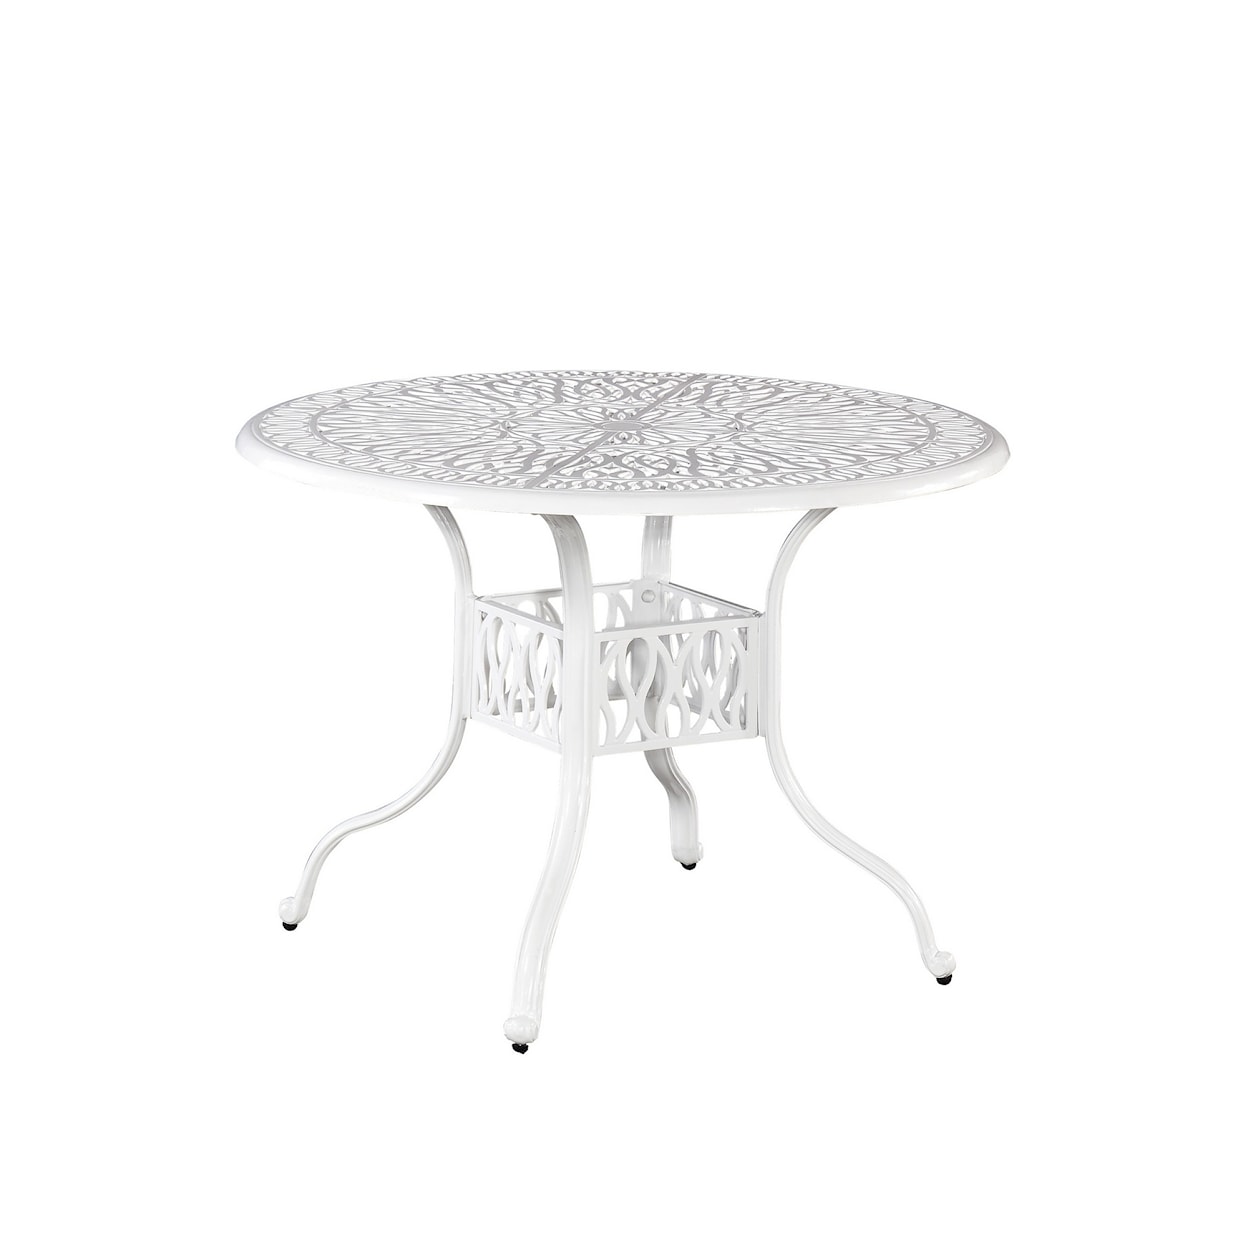 homestyles Capri Outdoor Dining Table